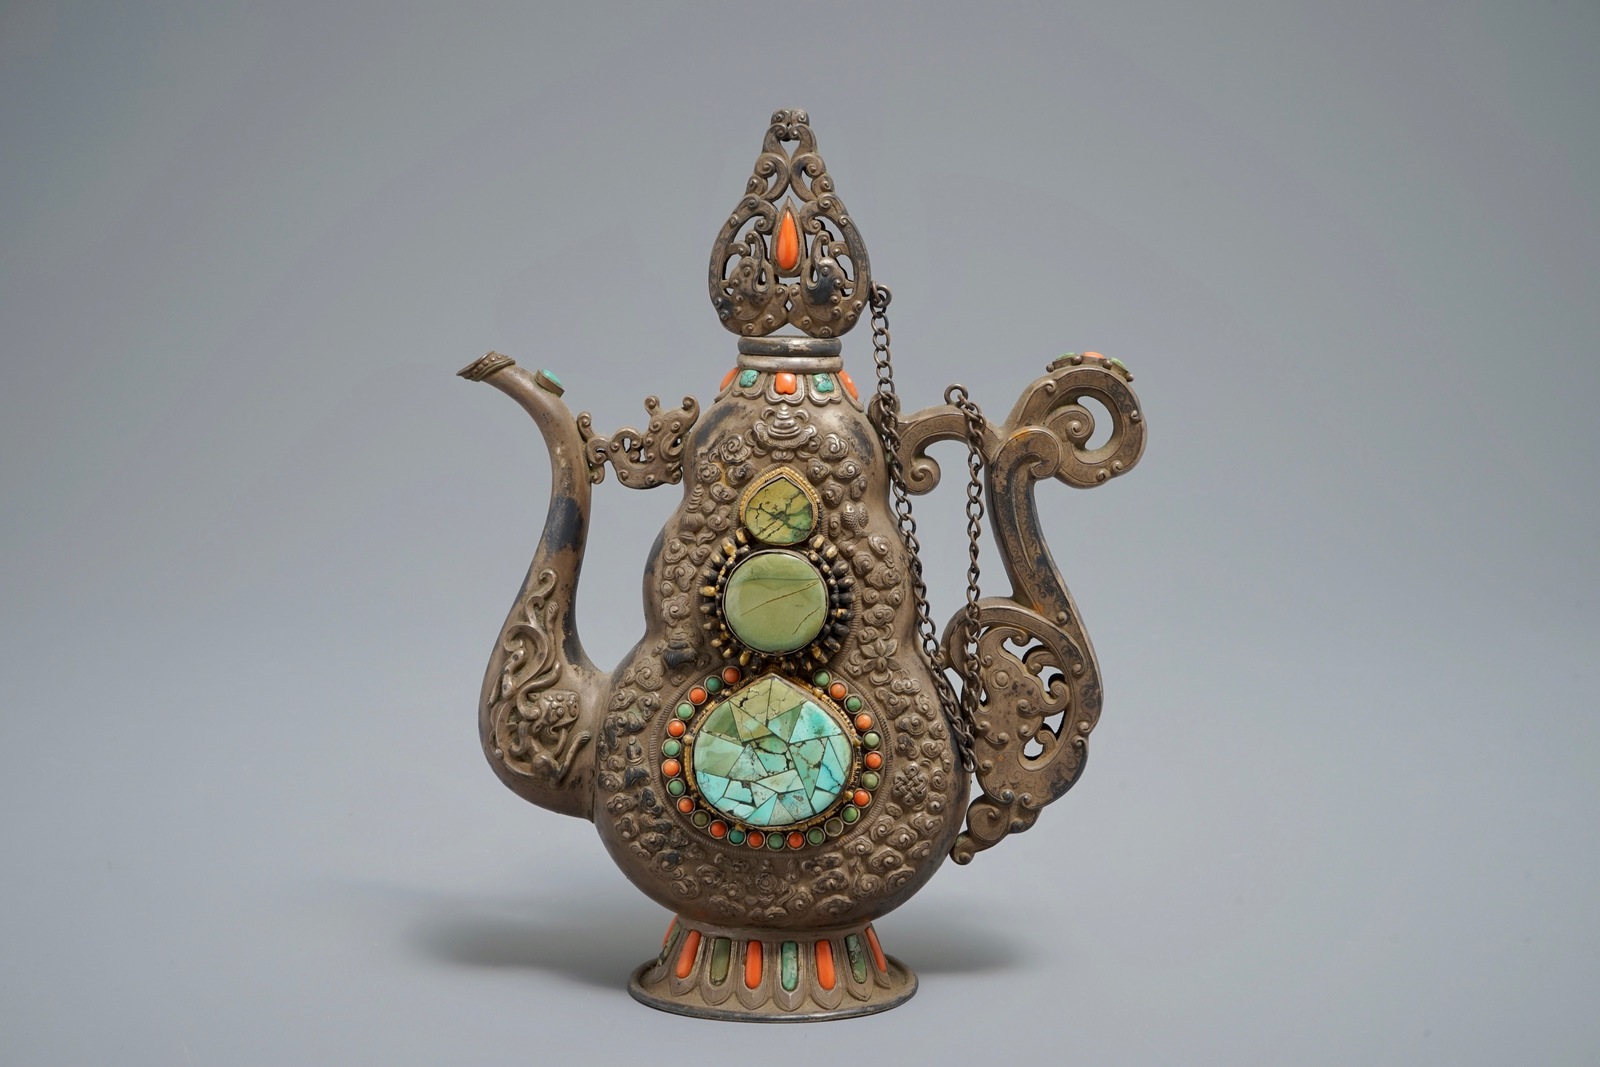 A silverd and parcel-gilt brass jug inlaid with turquoise and coral, Tibet or Mongolia, 19th C. - Image 4 of 7